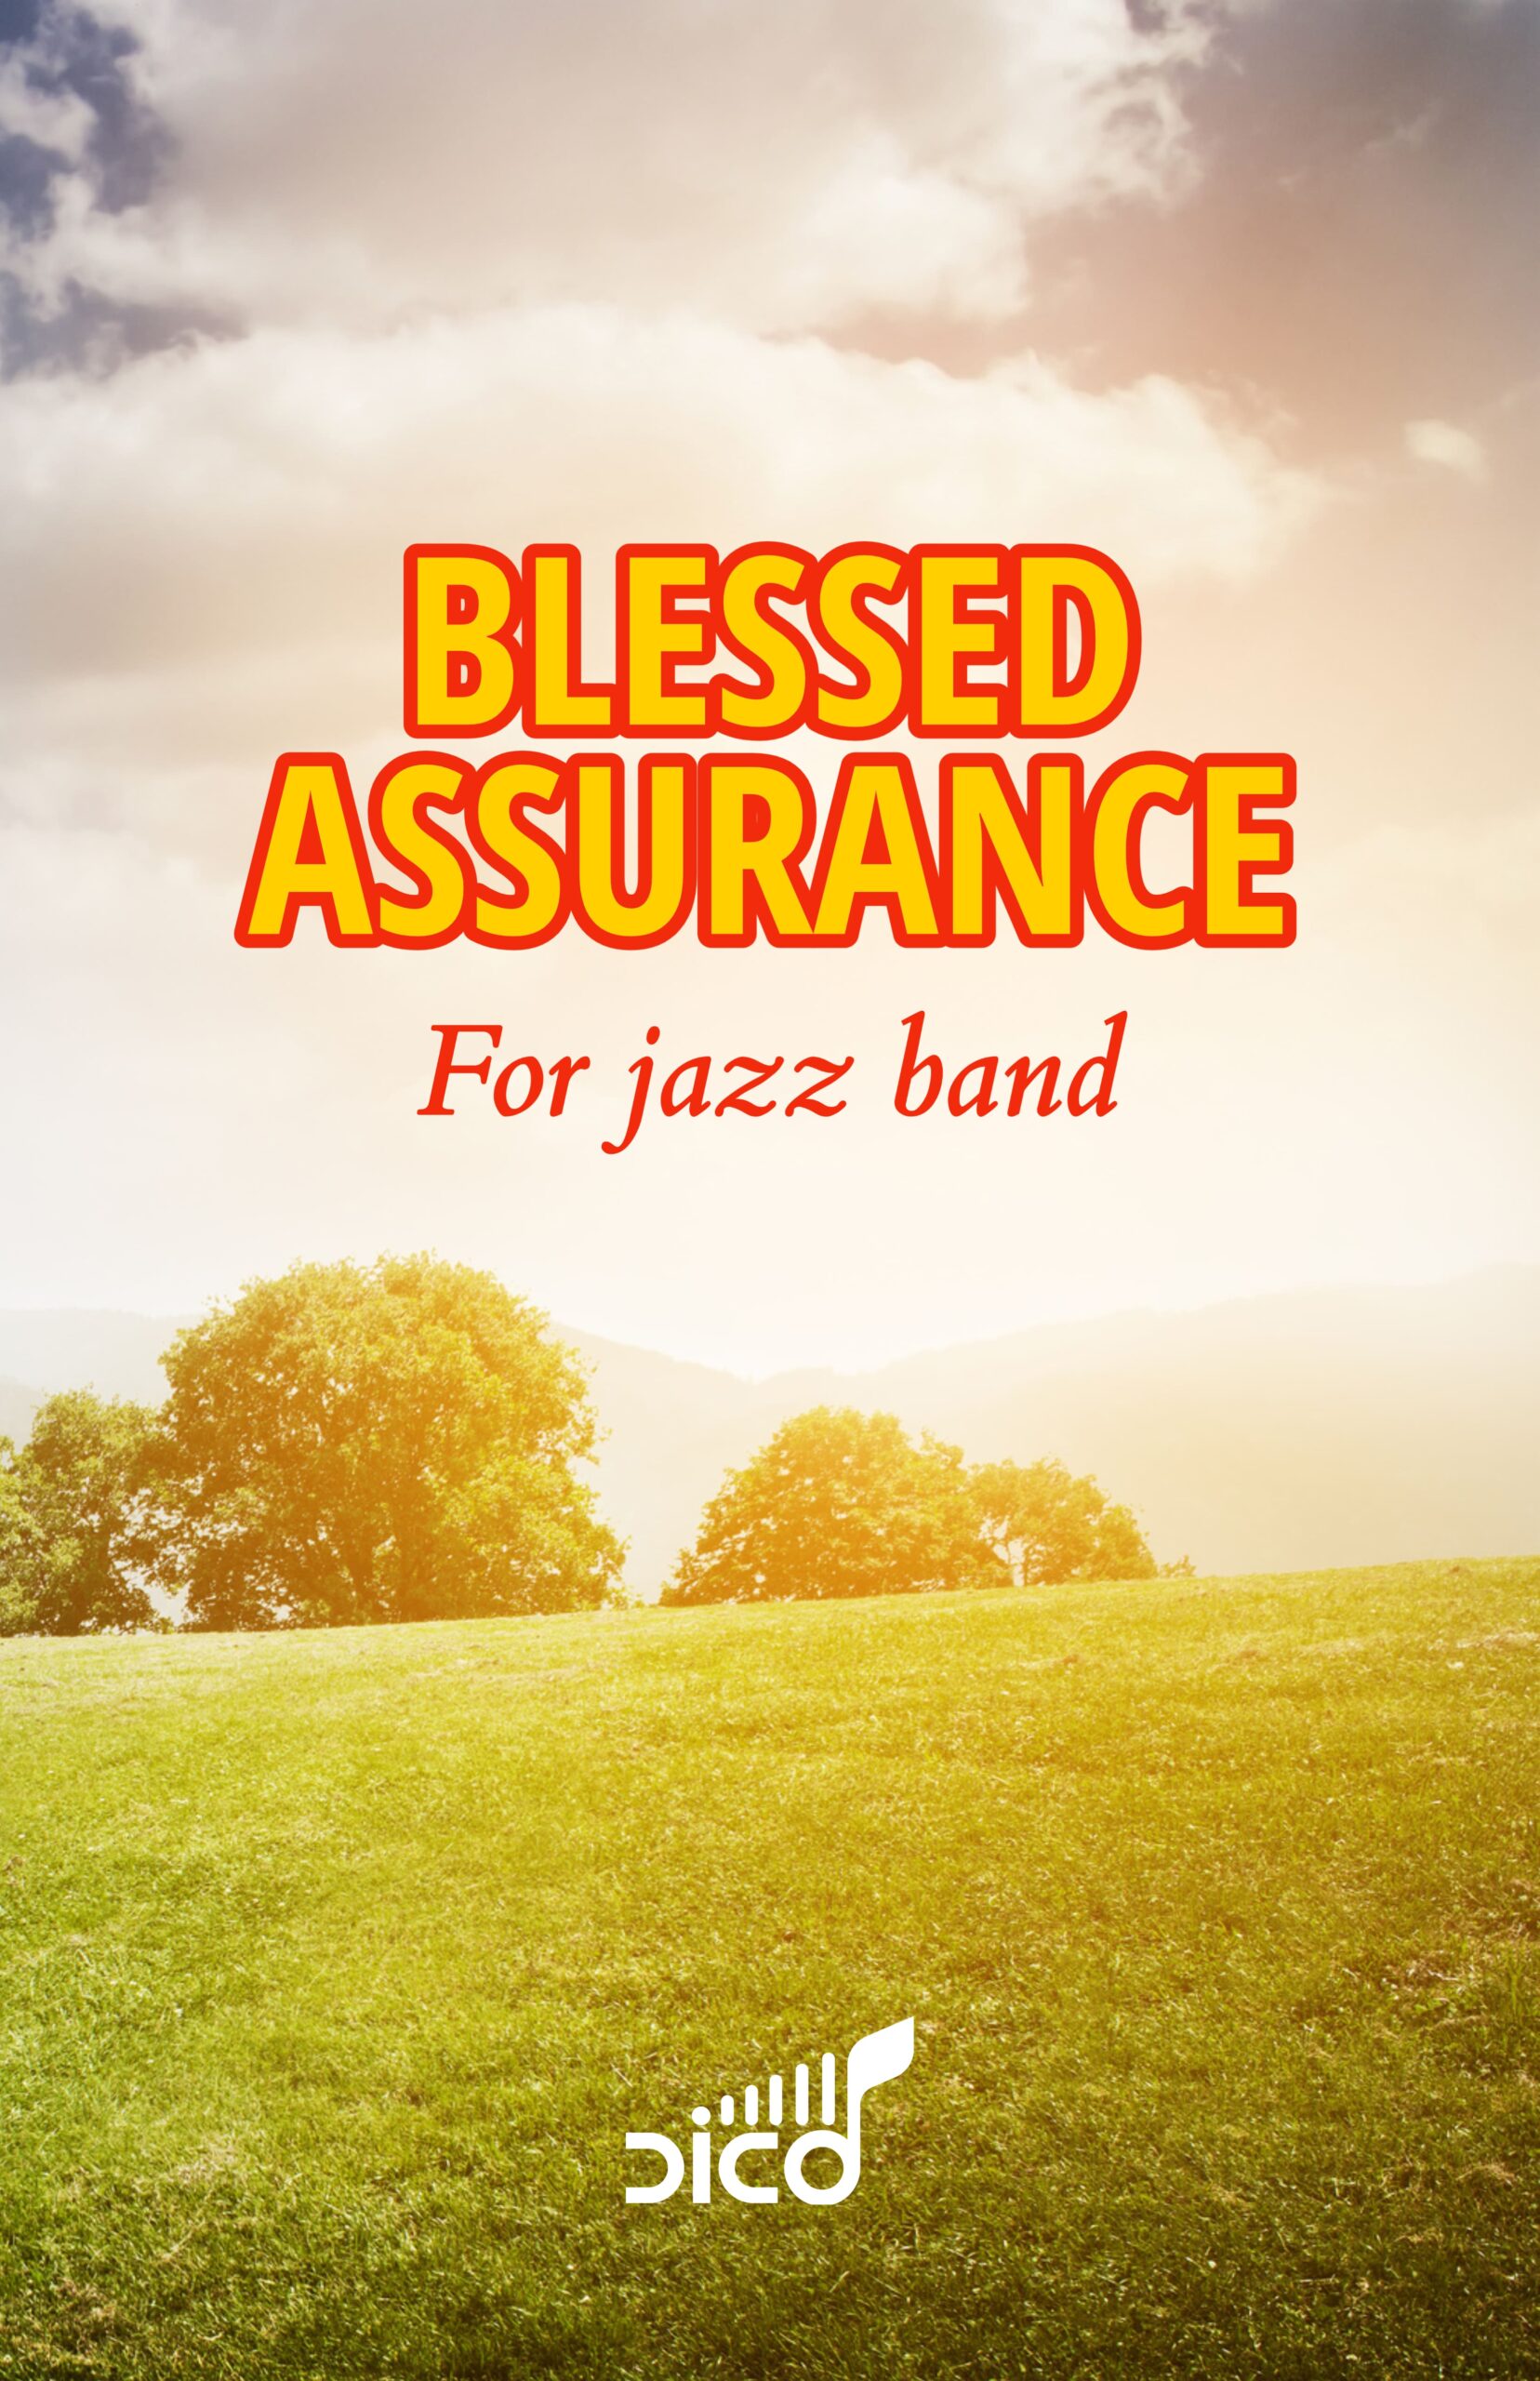 BLESSED ASSURANCE web cover 2 1 scaled